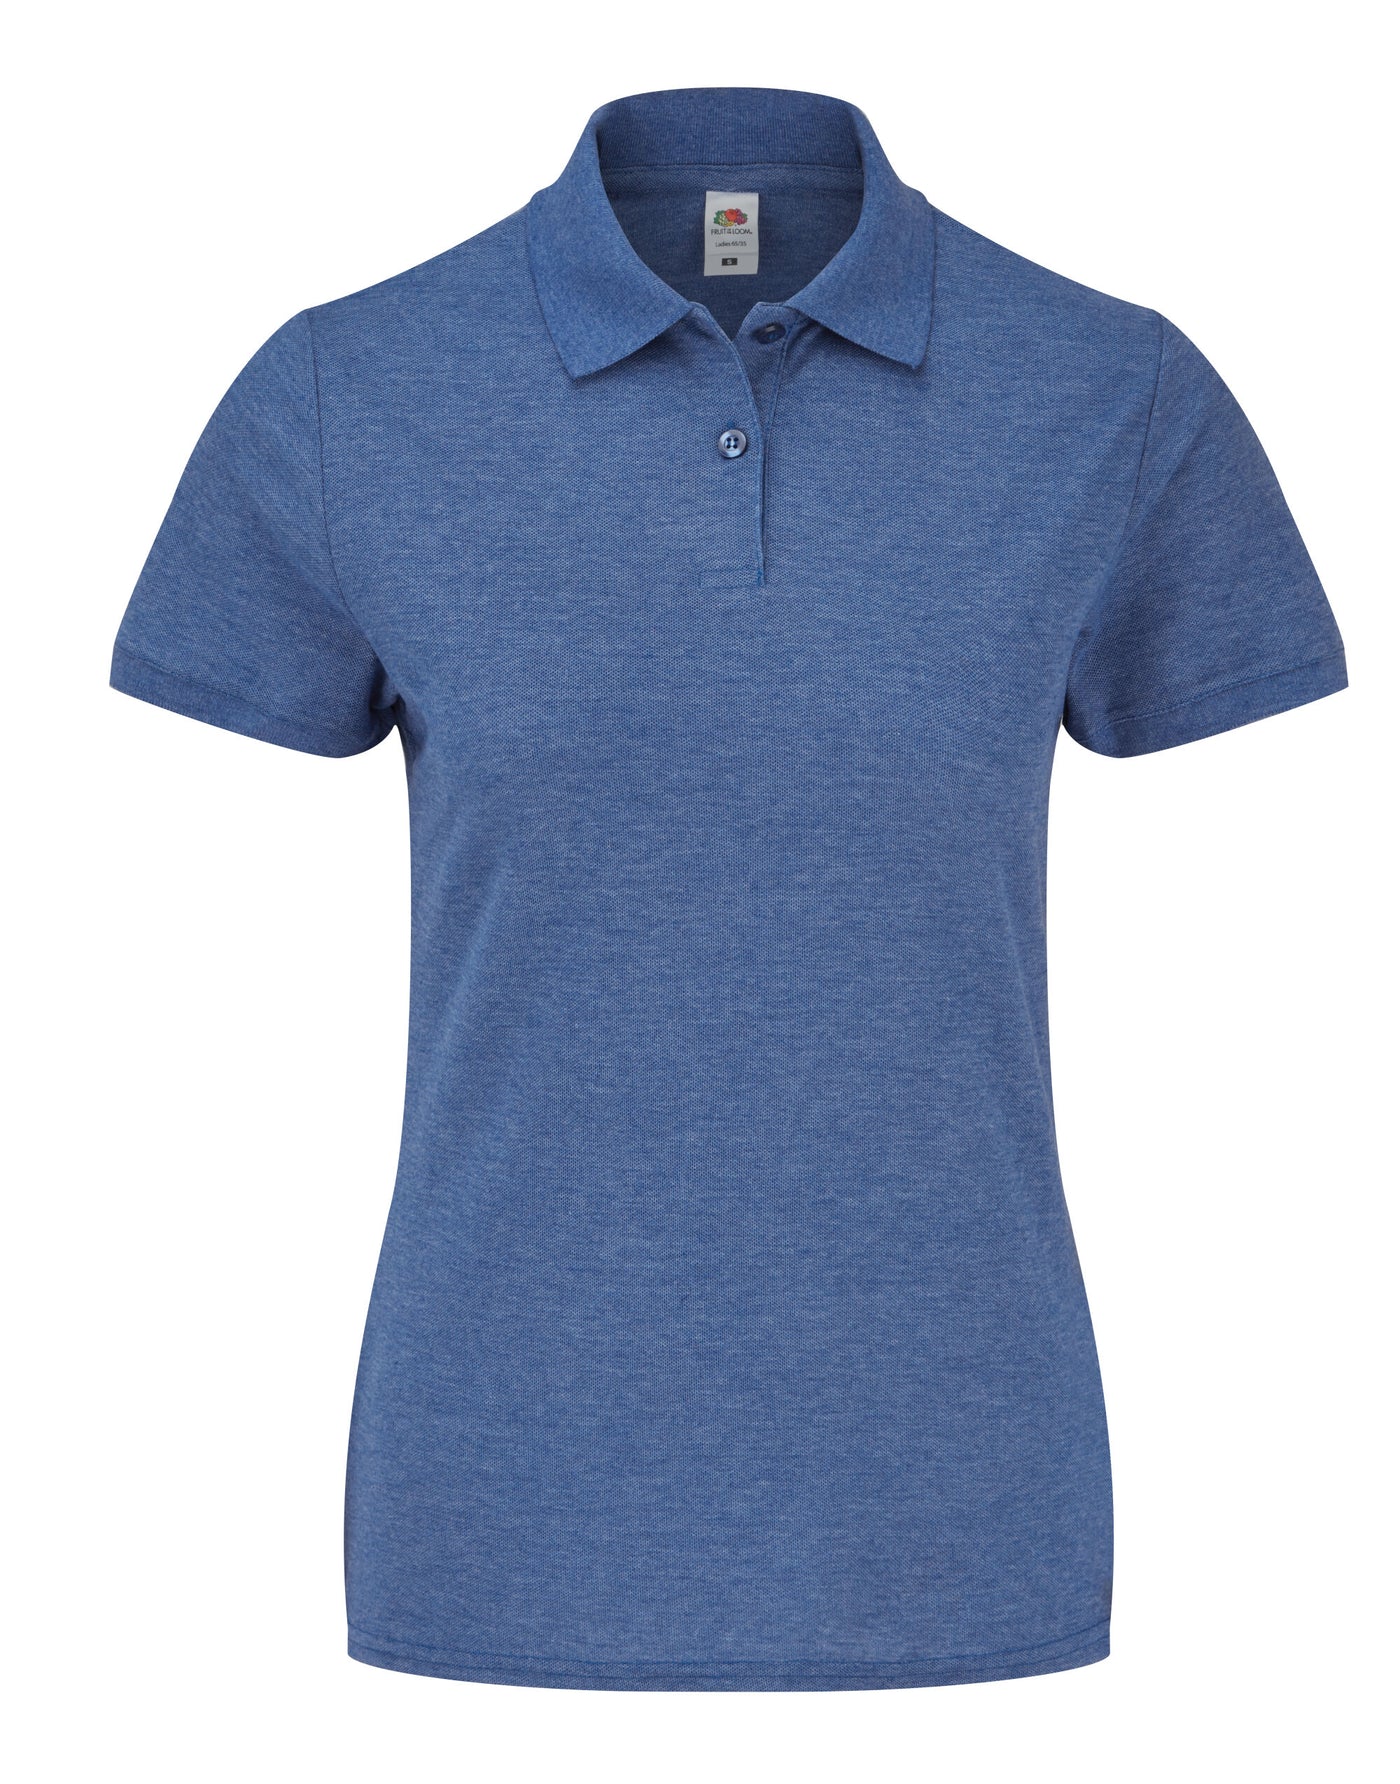 Ladies Fit Polo Shirt In Heather Royal